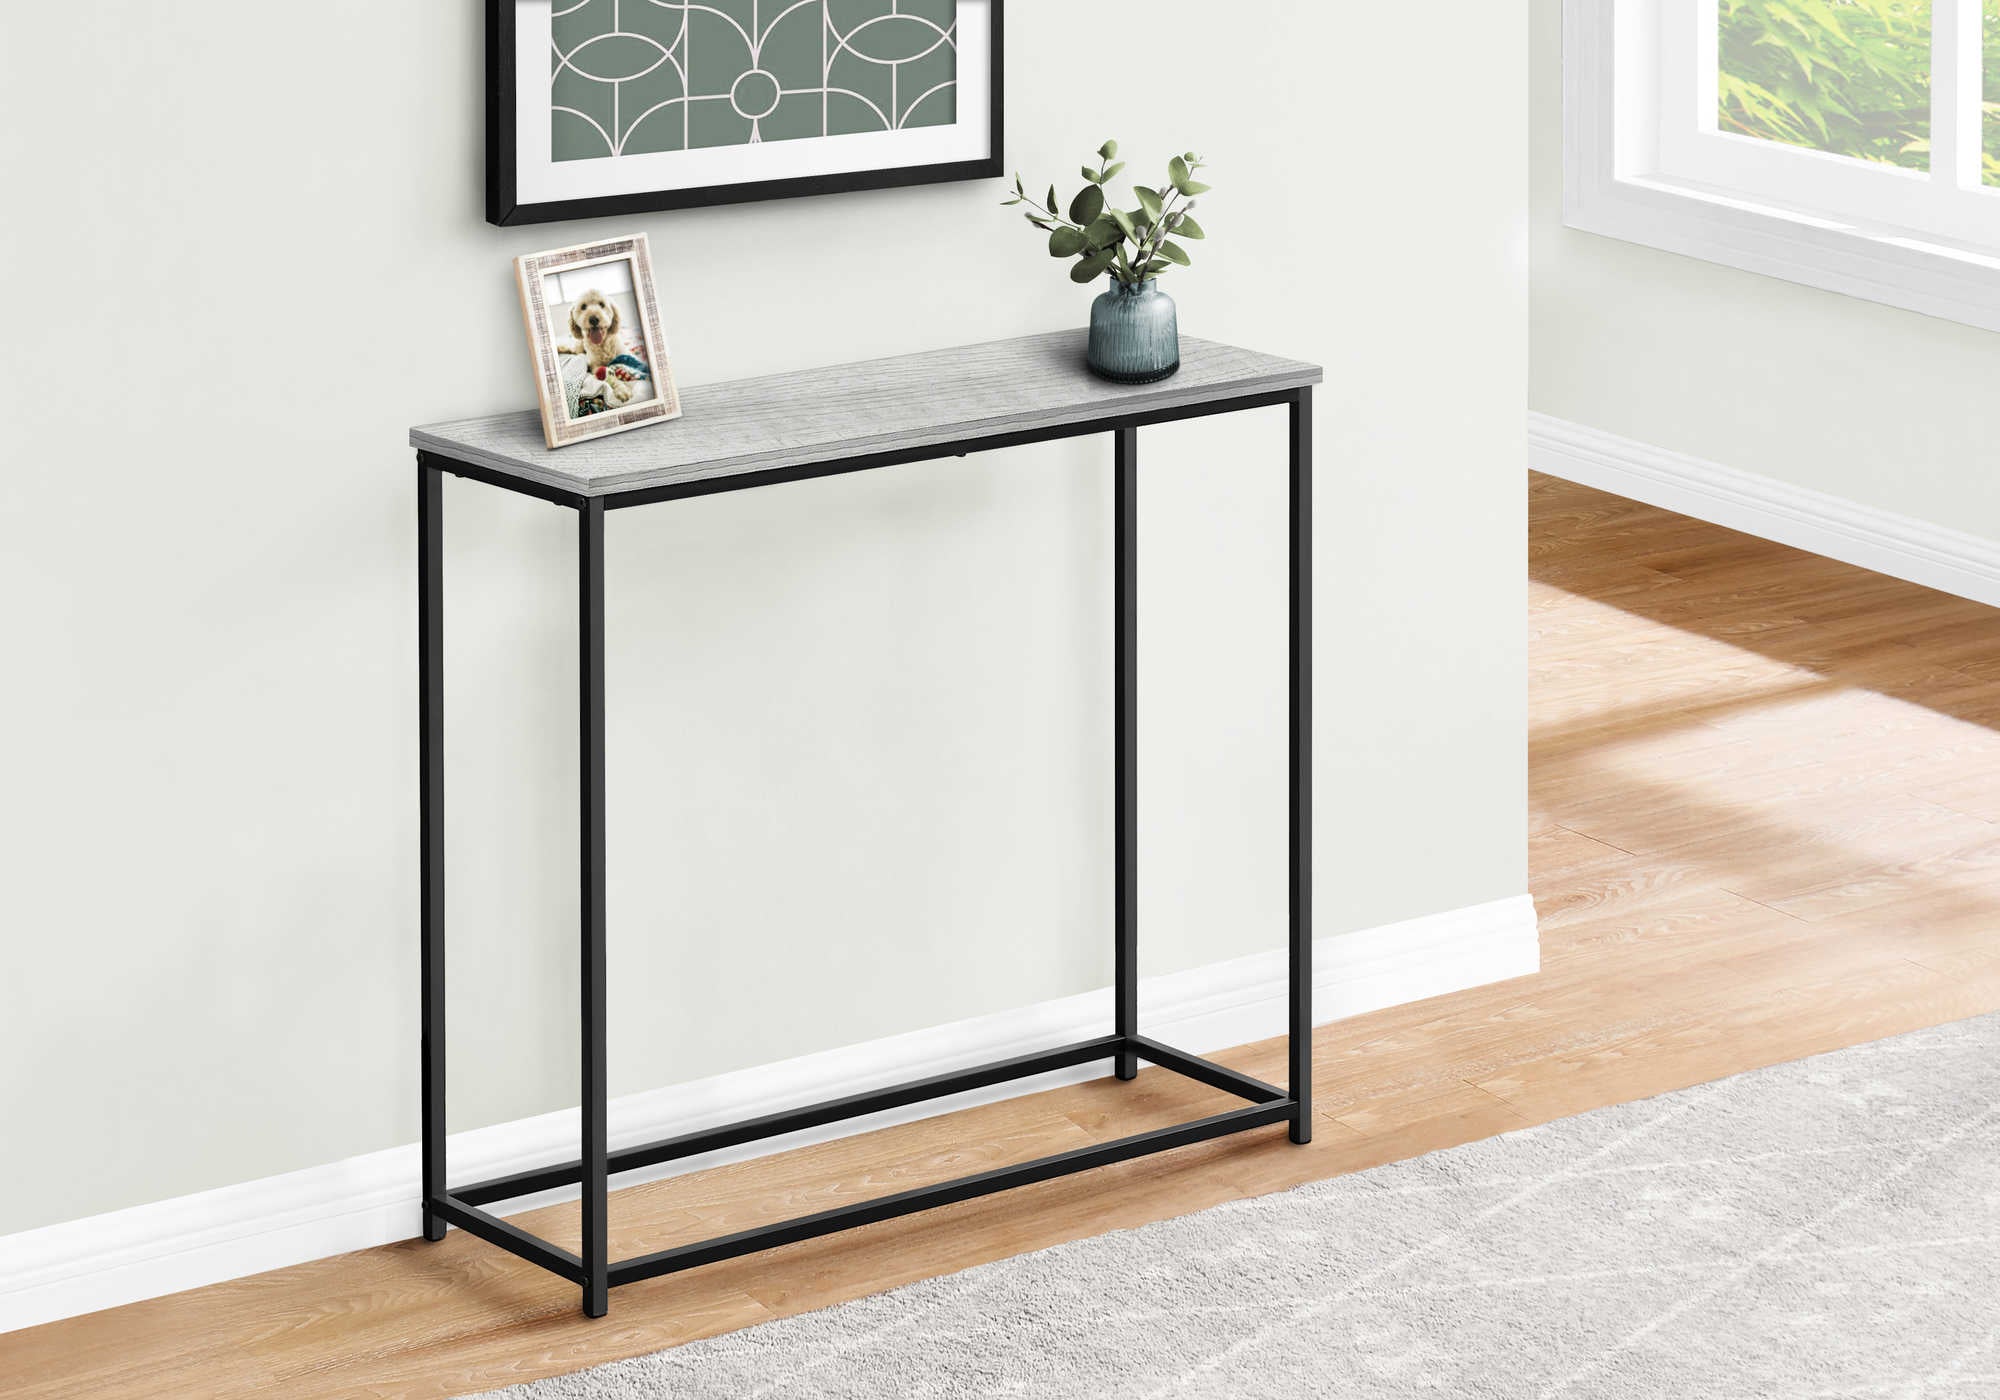 I 2251 - ACCENT TABLE - 32"L / GREY / BLACK METAL HALL CONSOLE BY MONARCH SPECIALTIES INC